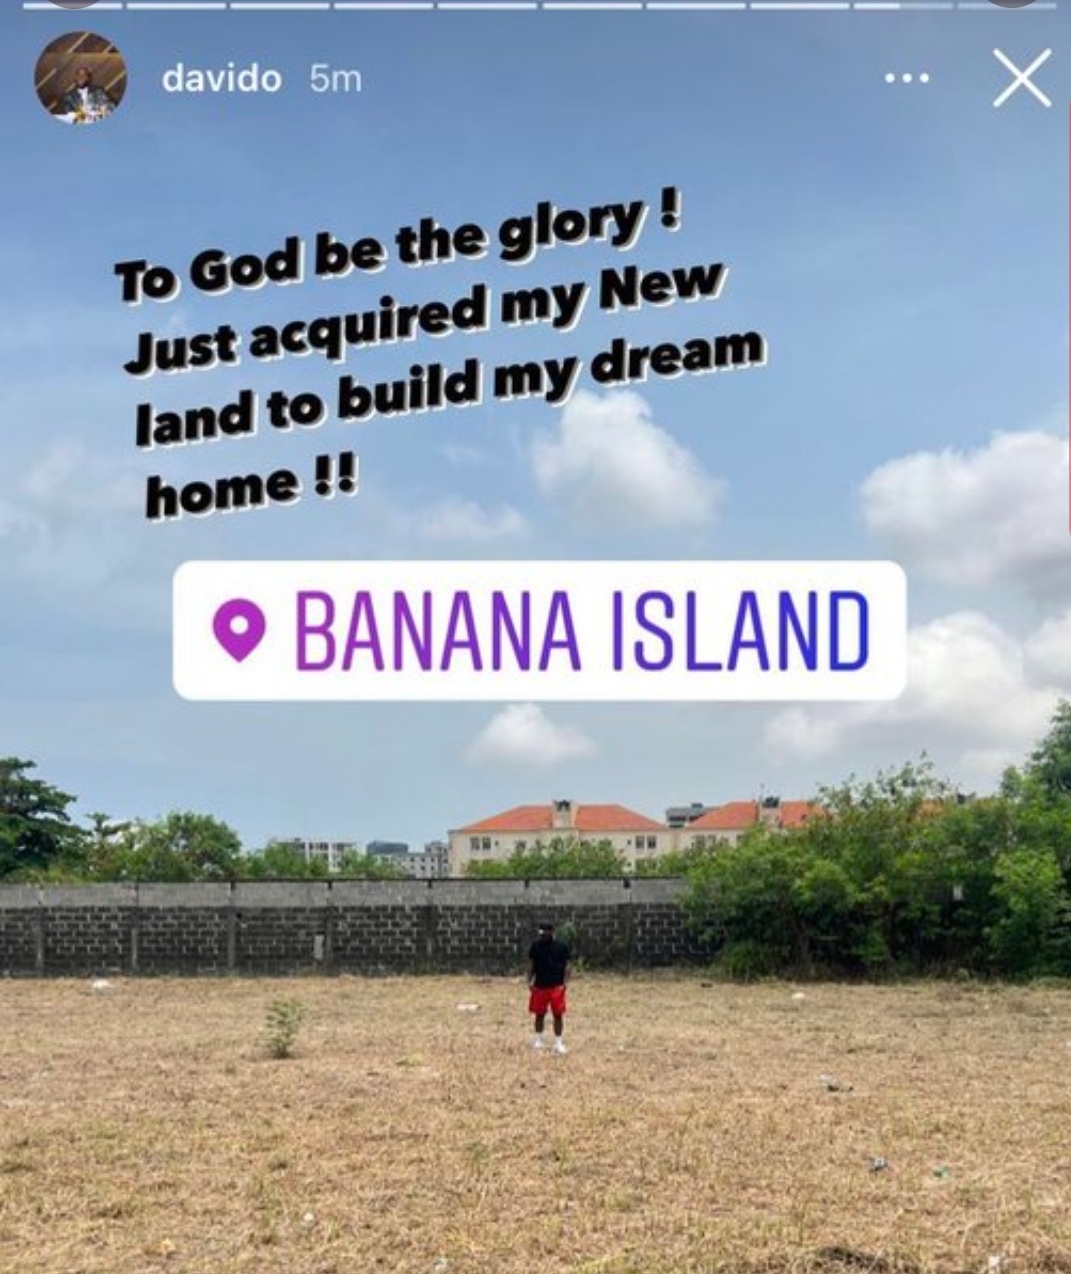 Davido reveals plan to build "dream home" on Banana Island 16 months after purchasing a house on the Island 1